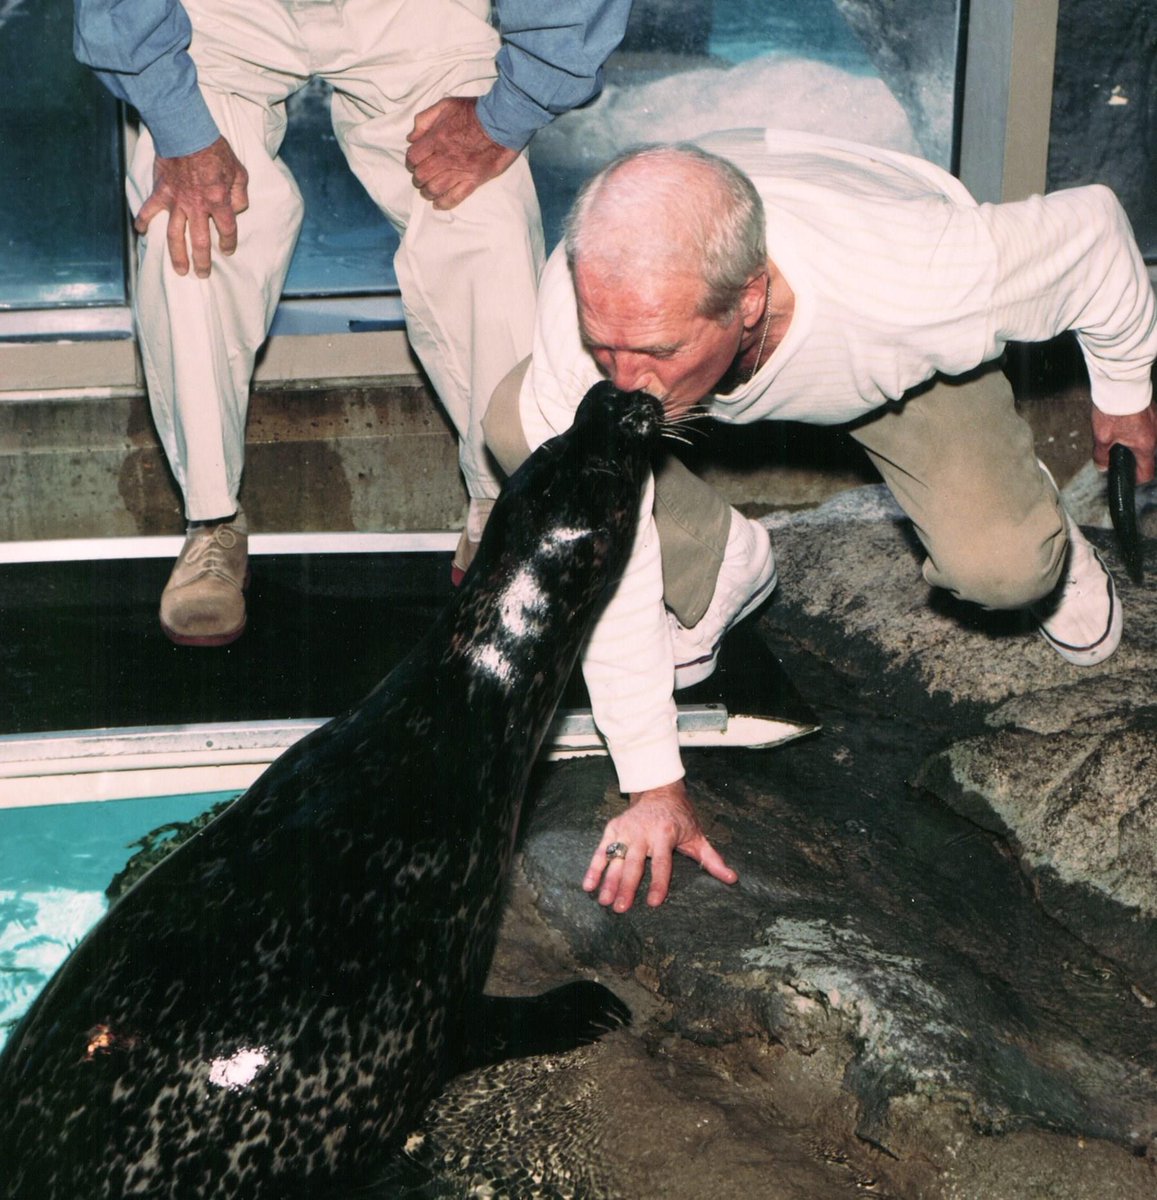 We are saddened to share the news that Tillie, one of our dearly-loved harbor seals, passed away last night at 37 years old. Tillie was born at Mystic Aquarium on May 30, 1986, before joining us at The Maritime Aquarium at Norwalk in November of 1988. As the second oldest seal